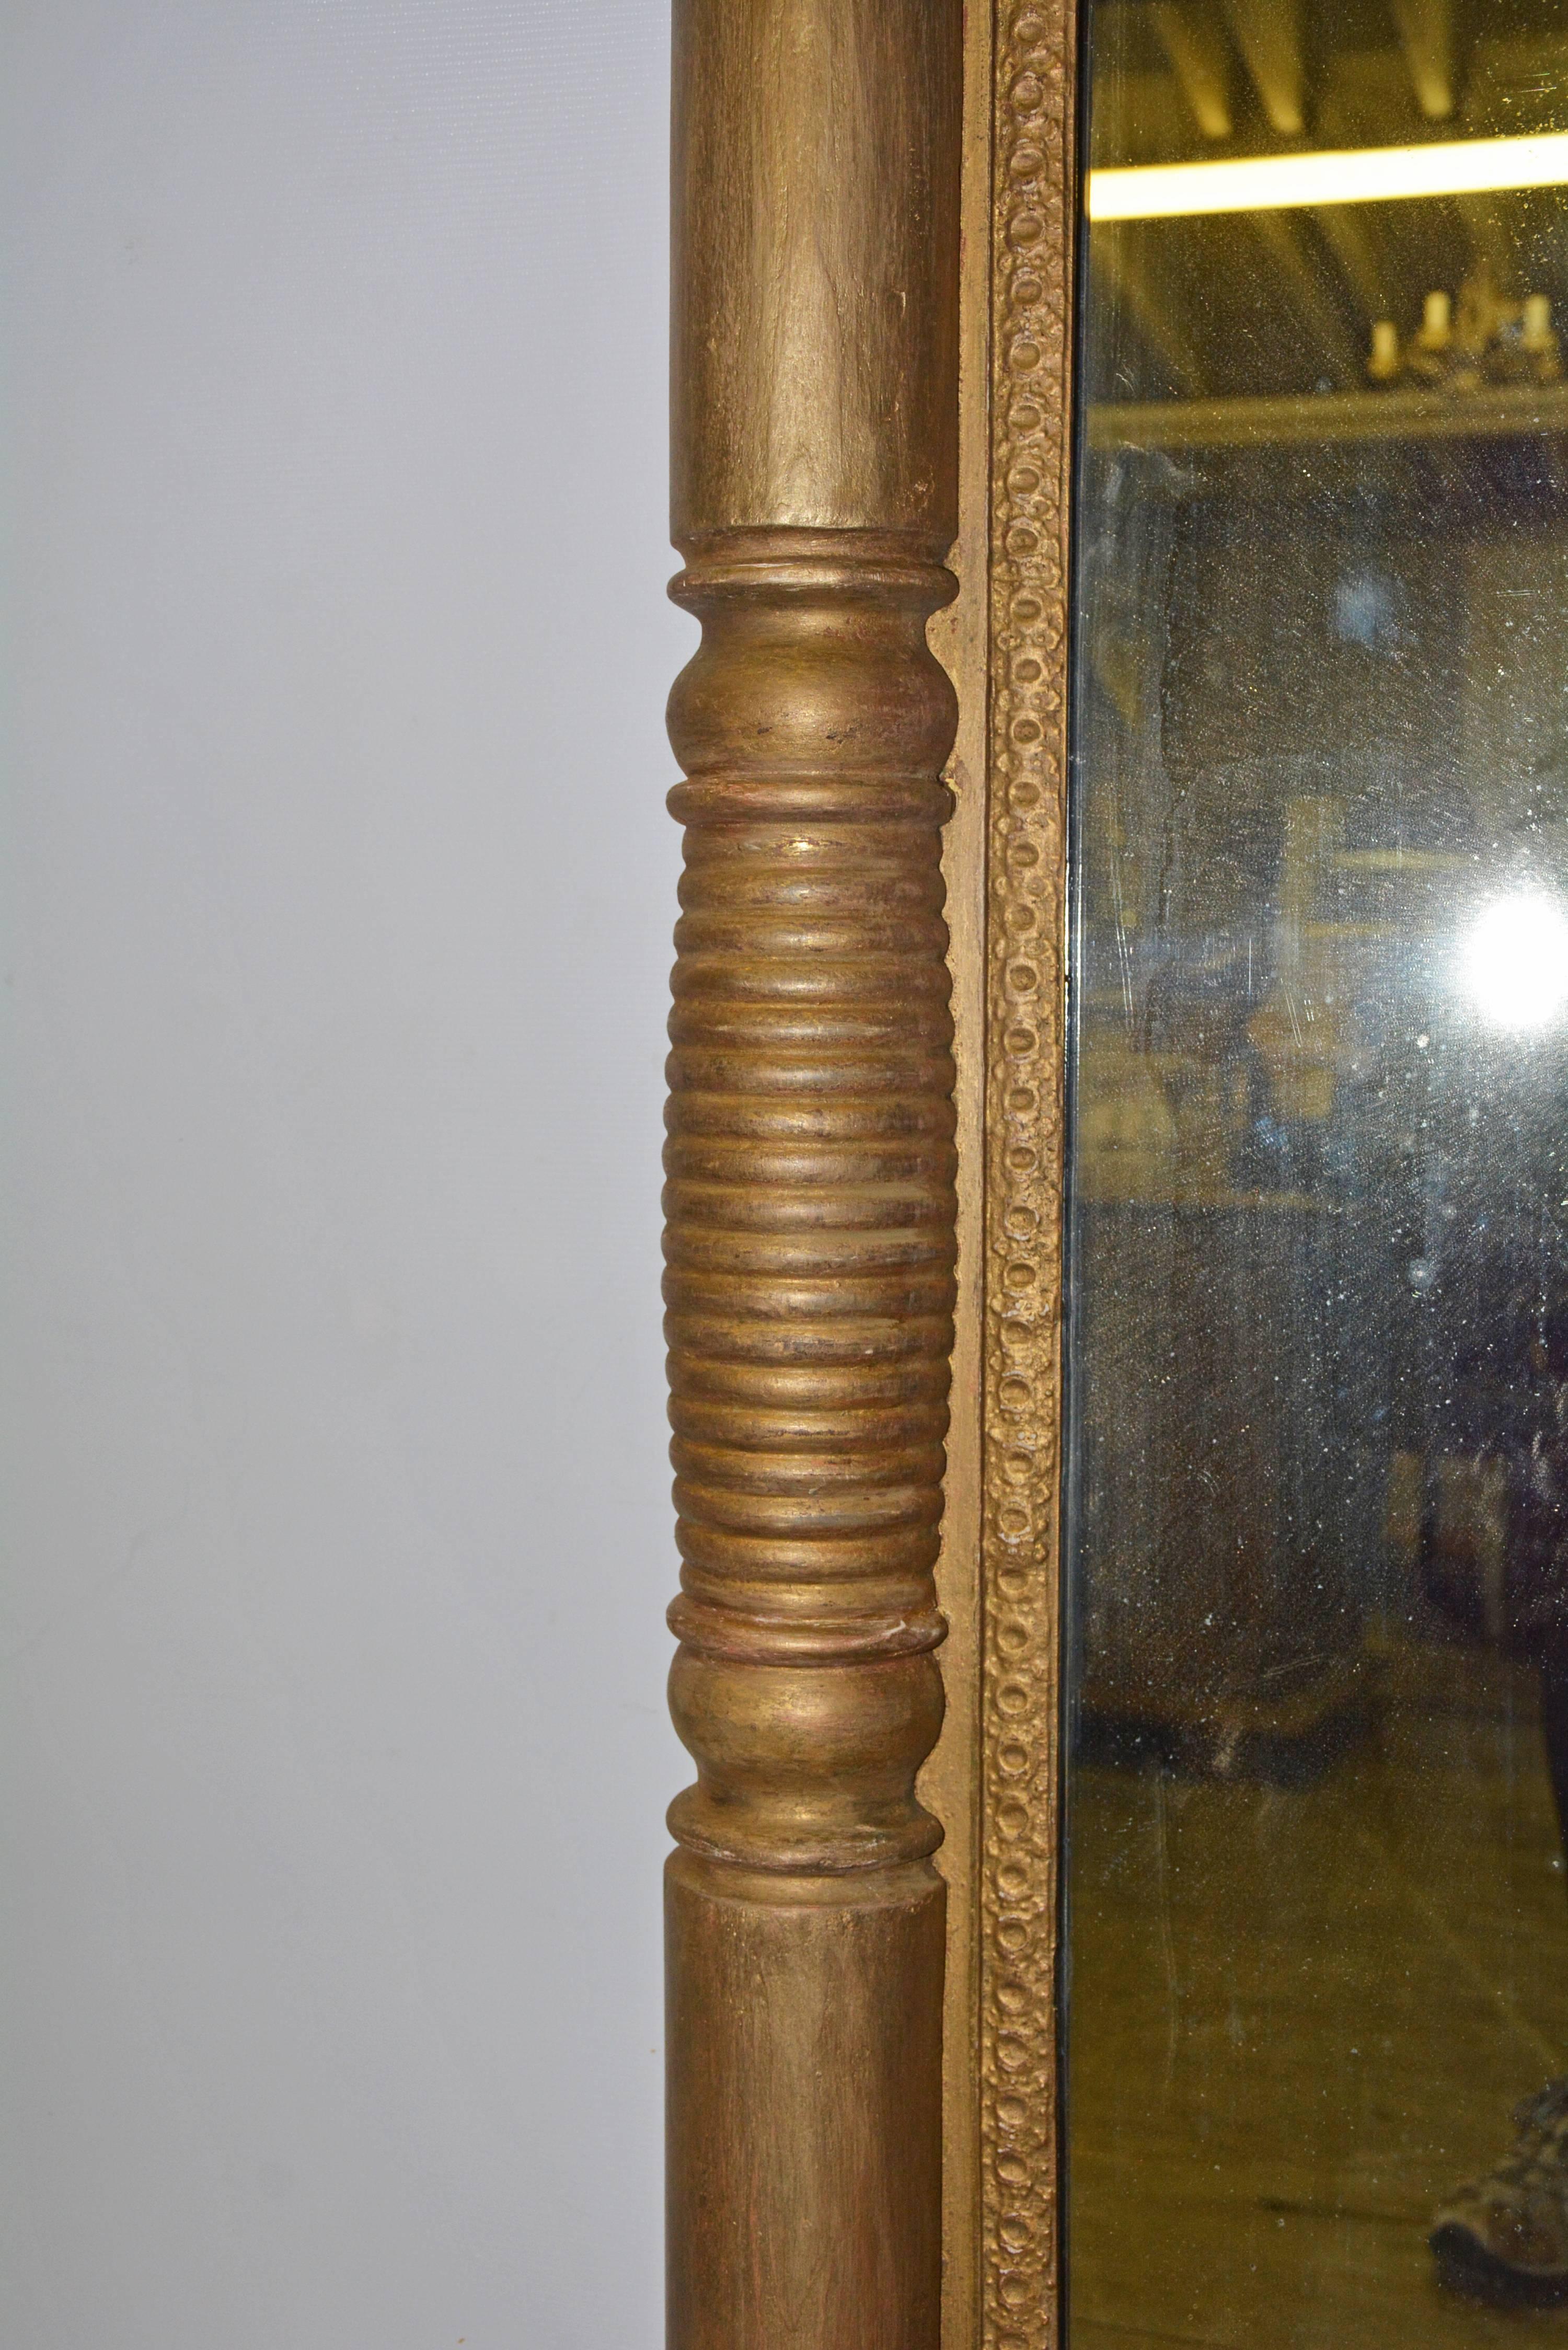 Late 19th century Federal style silvered mirror is composed of alternating ribbed and smooth sectioned pilasters ending at the corners with square blocks. The backing is made up of six horizontal boards and is wired for hanging.
 